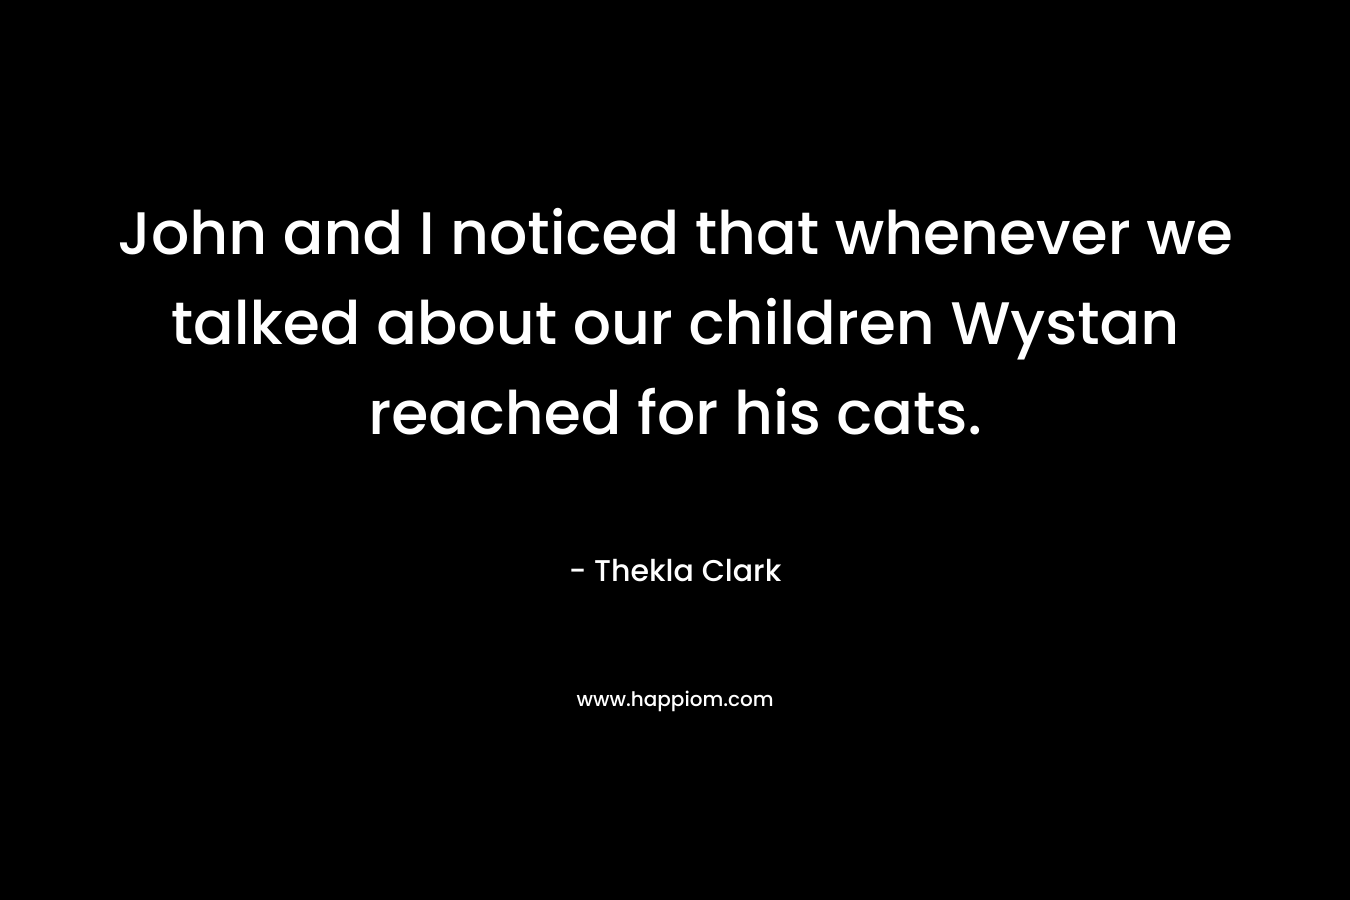 John and I noticed that whenever we talked about our children Wystan reached for his cats.